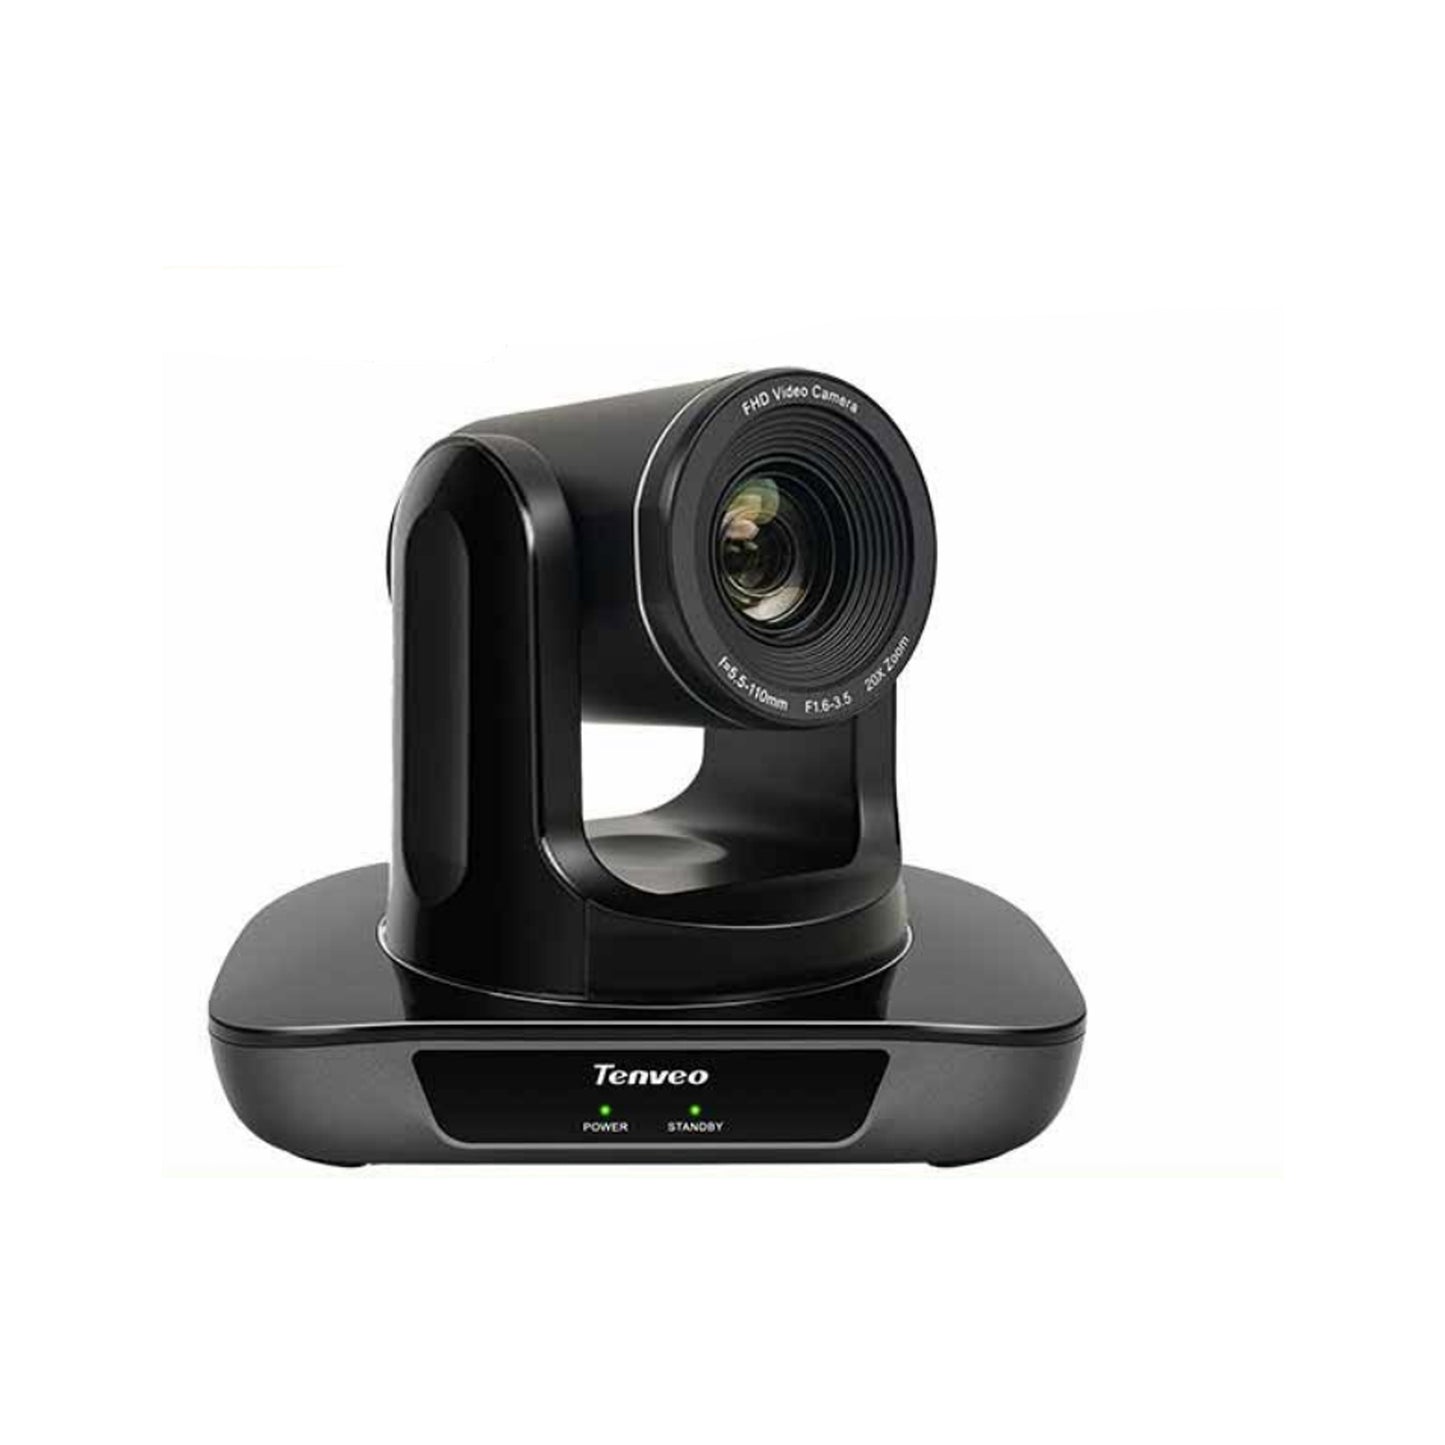 TENVEO TEVO-UHD20U FHD 1080P USB PTZ Video Conference Camera with Pan & Tilt, 20x Optical Zoom Plug & Play for Meetings and Livestreaming